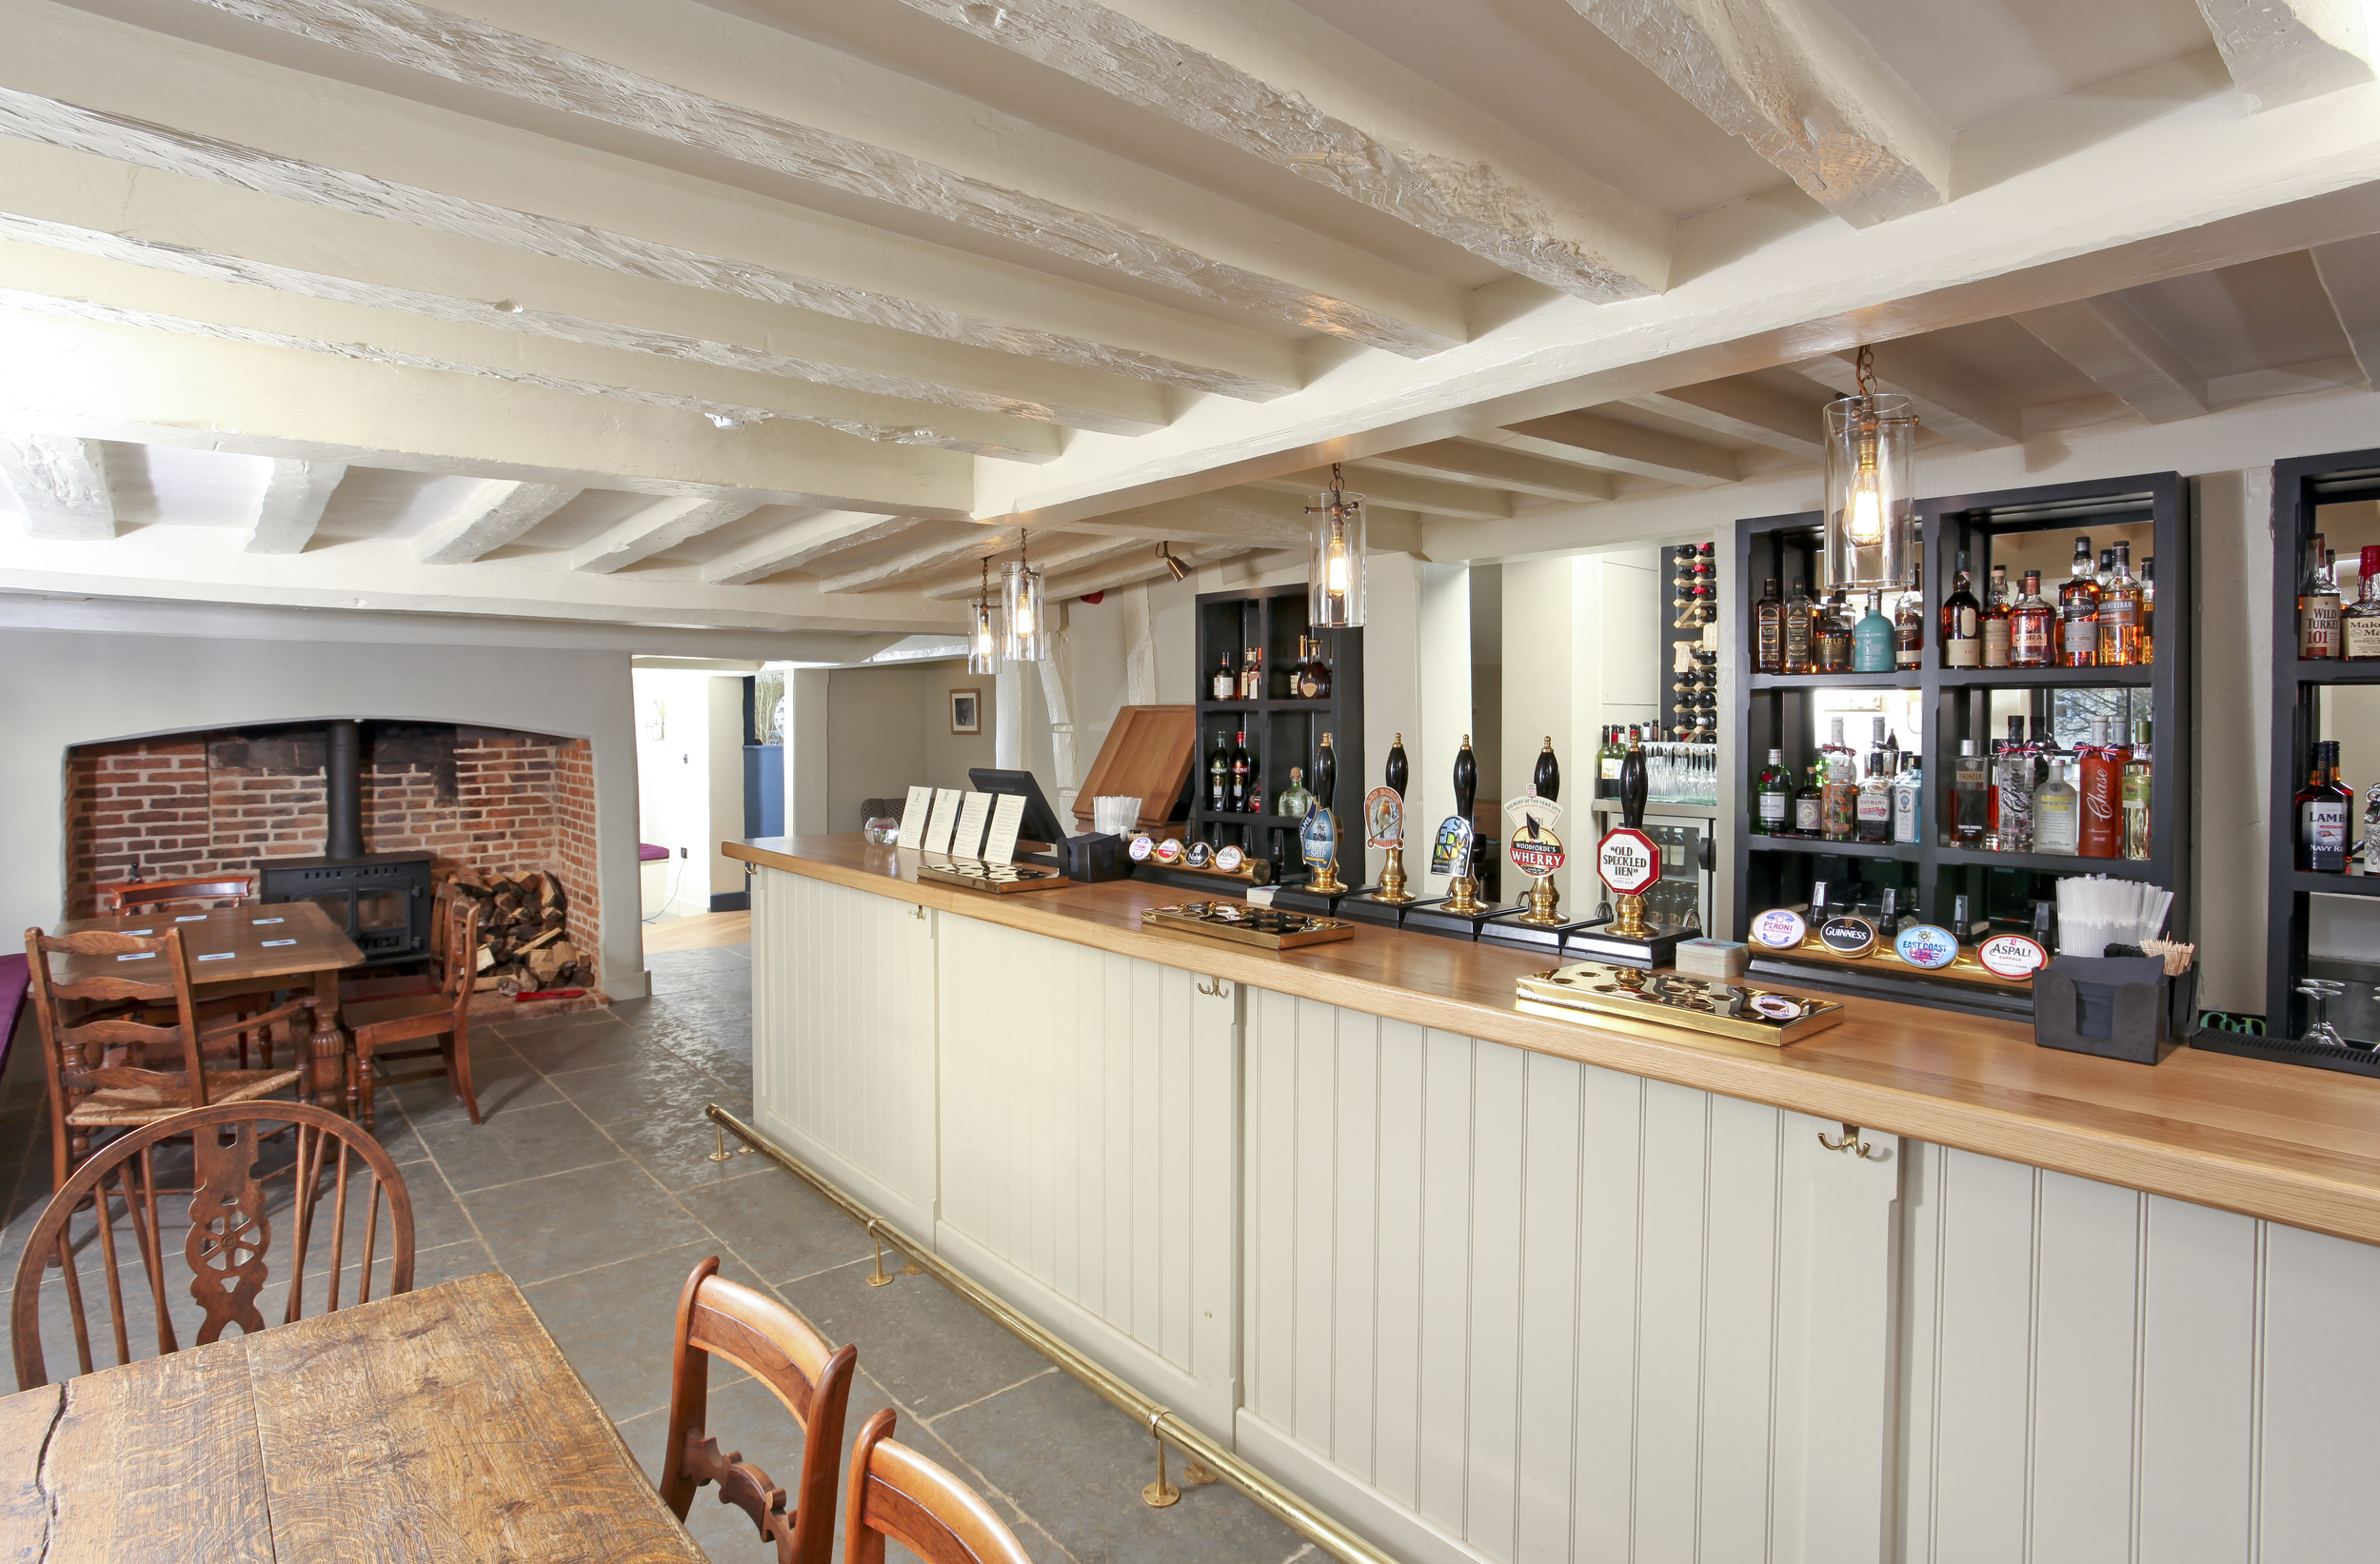  The proposals are sympathetic to the Grade II listed rural public house and ensures its operation as a viable proposition long into the future. Patrick Allen &amp; Associates Ltd. successfully took on the task of providing for a greater number of cu